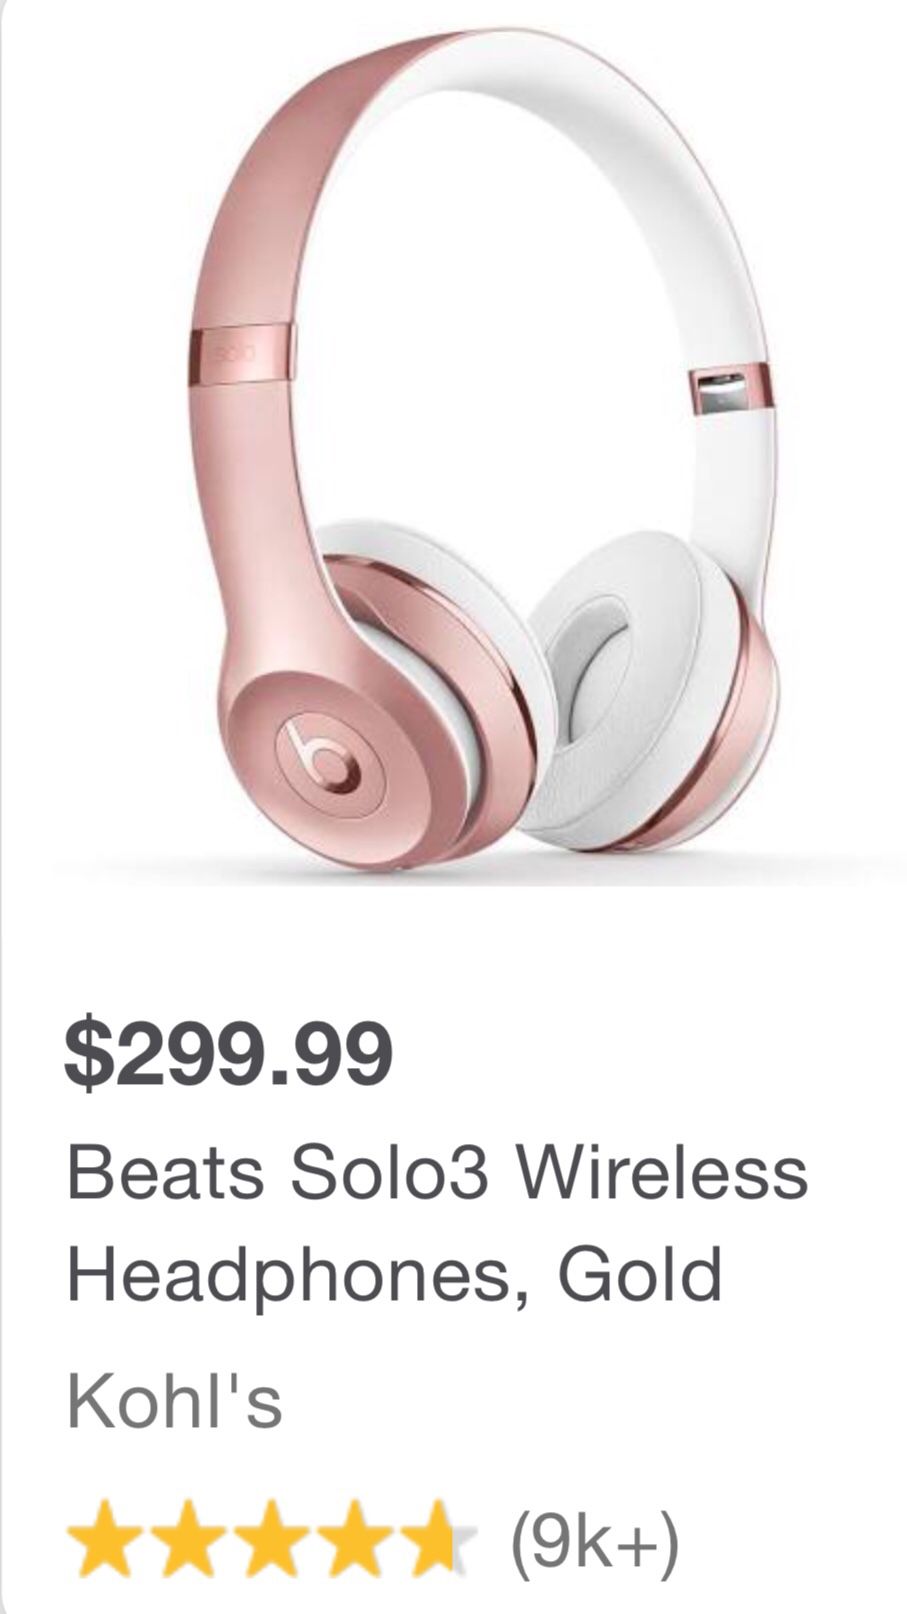 Rose Limited Edition Rose Gold newest Beats wireless headphones